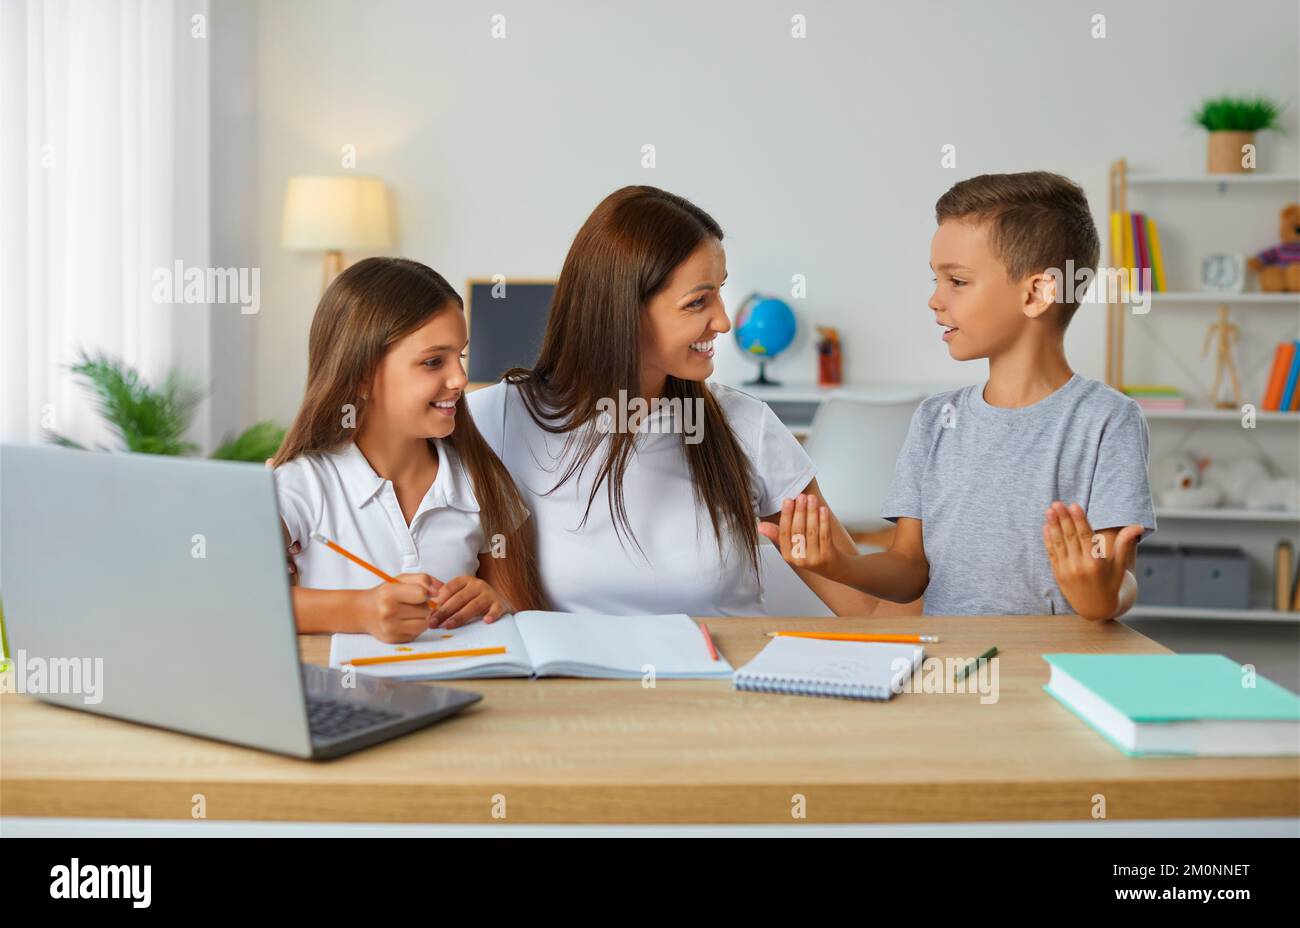 Caring and friendly young mother helps her children to complete their school homework. Stock Photo